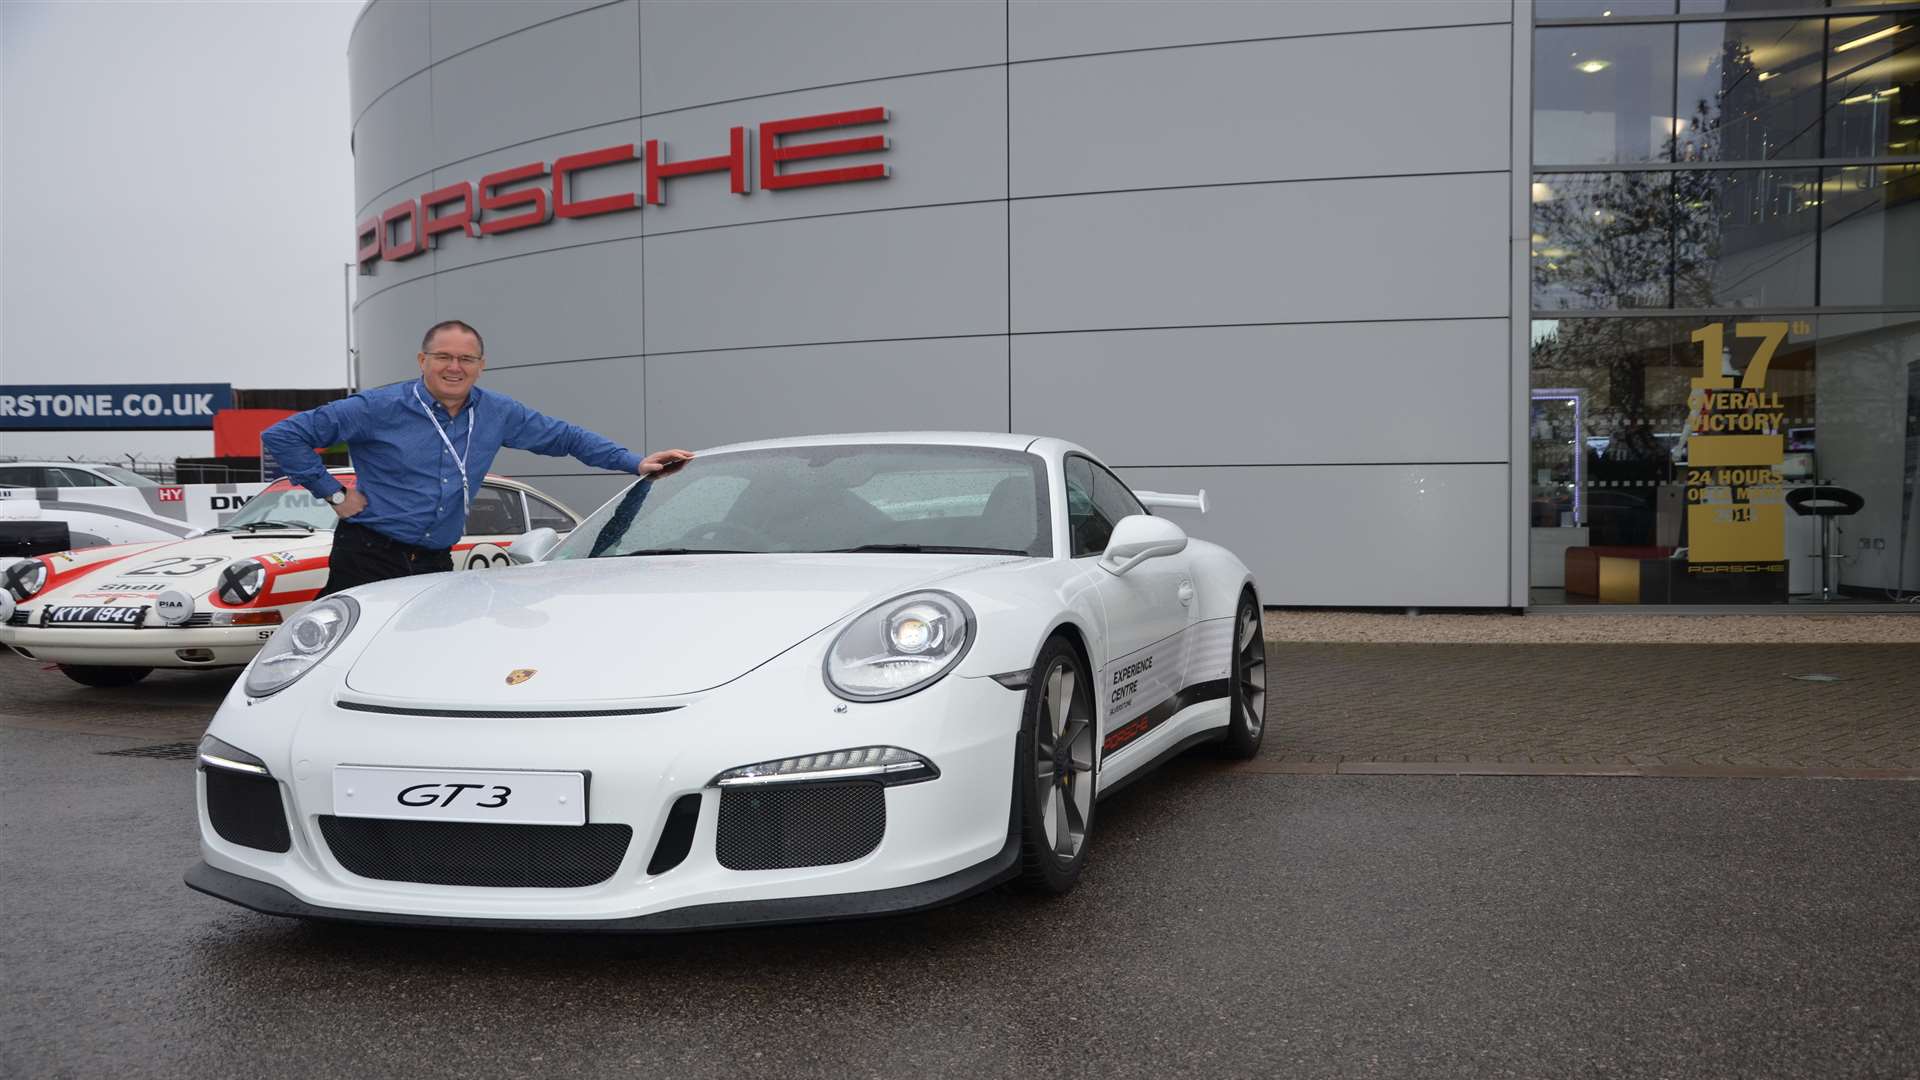 The 911 GT3 I drove on my Porsche Driving Experience at Silverstone